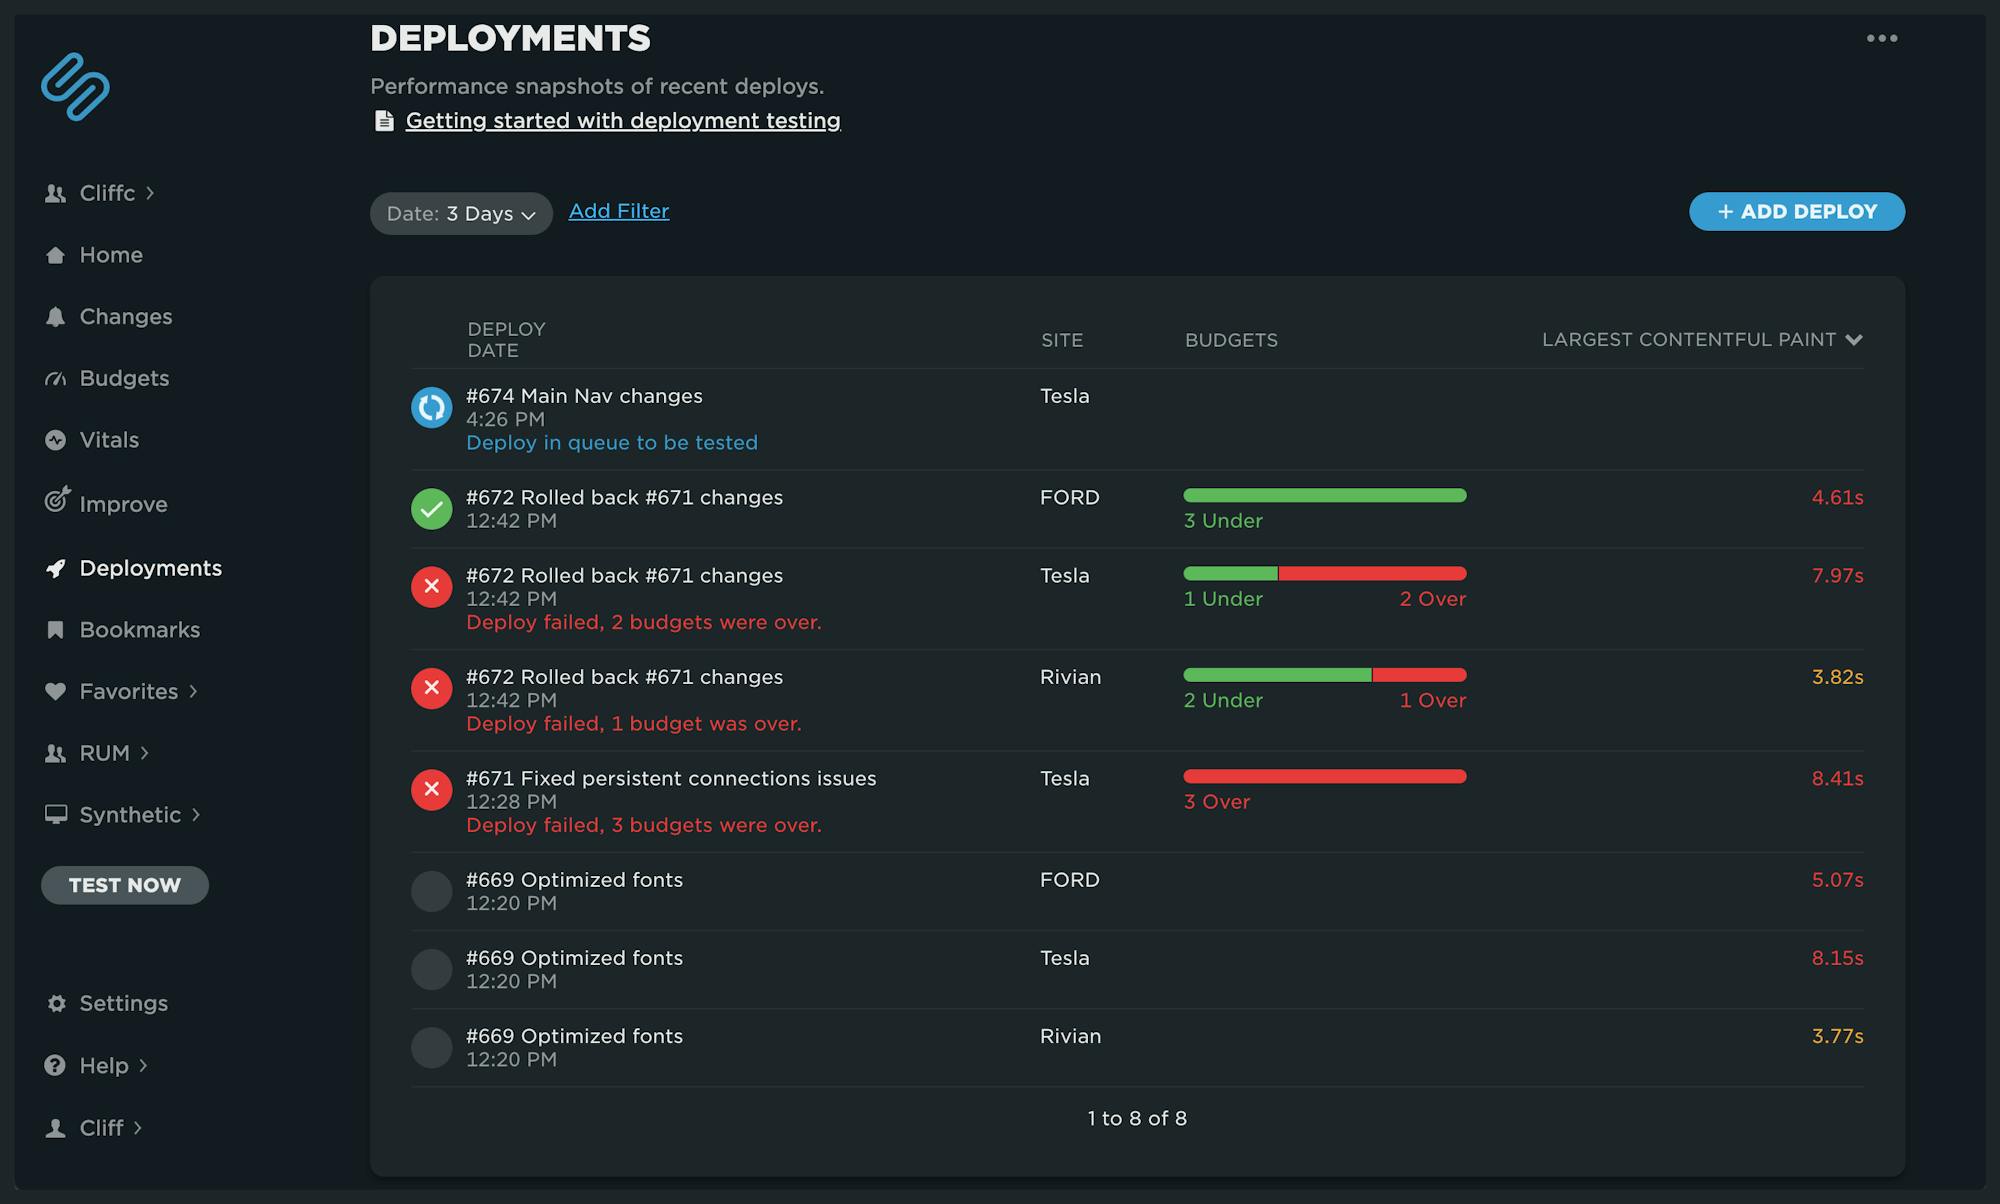 Deployments dashboard showing list of past deployments in various states.